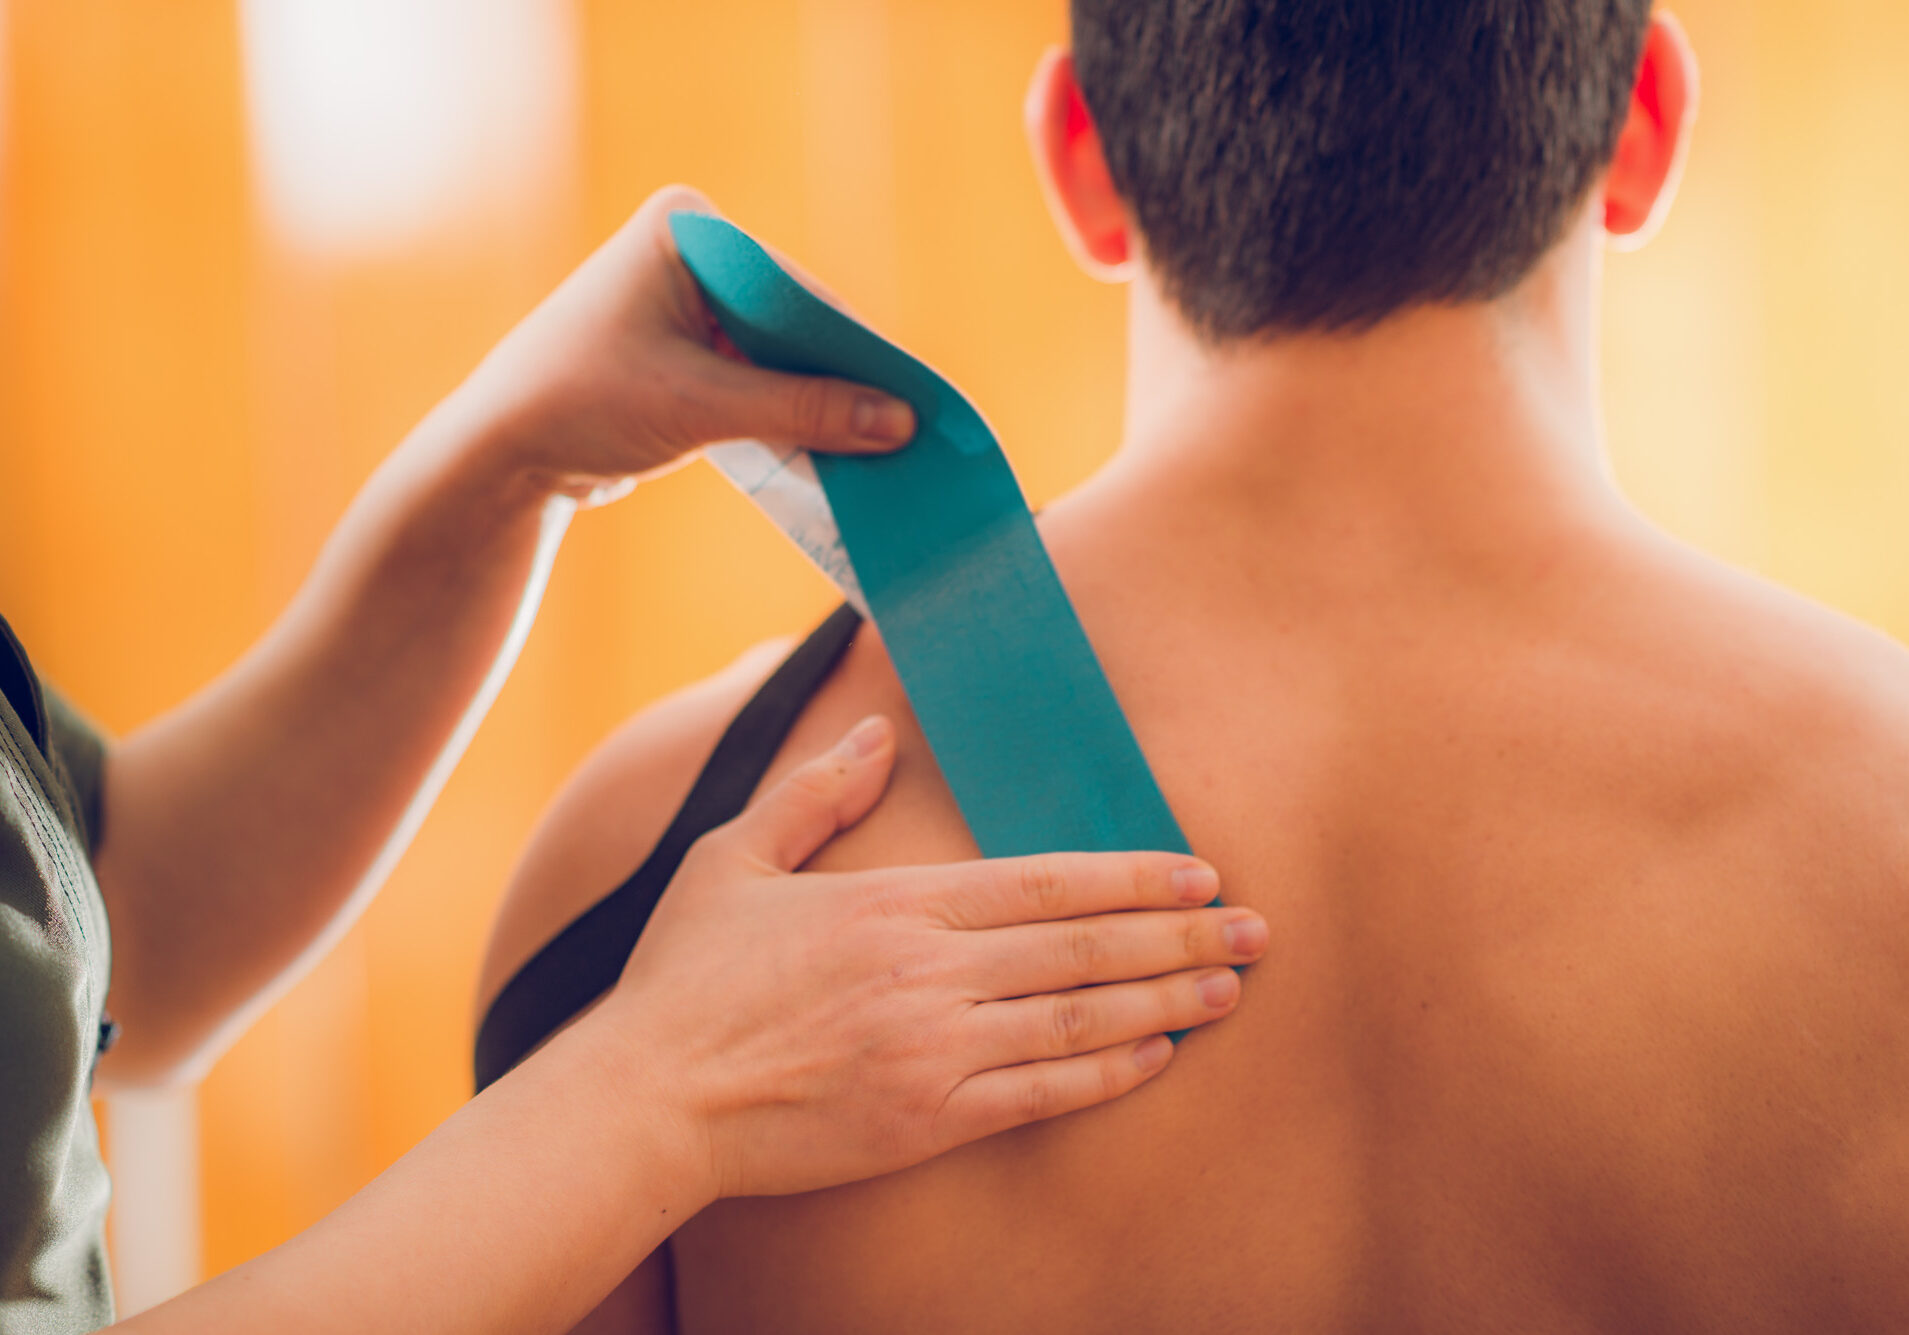 Shoulder treatment with kinesio tape